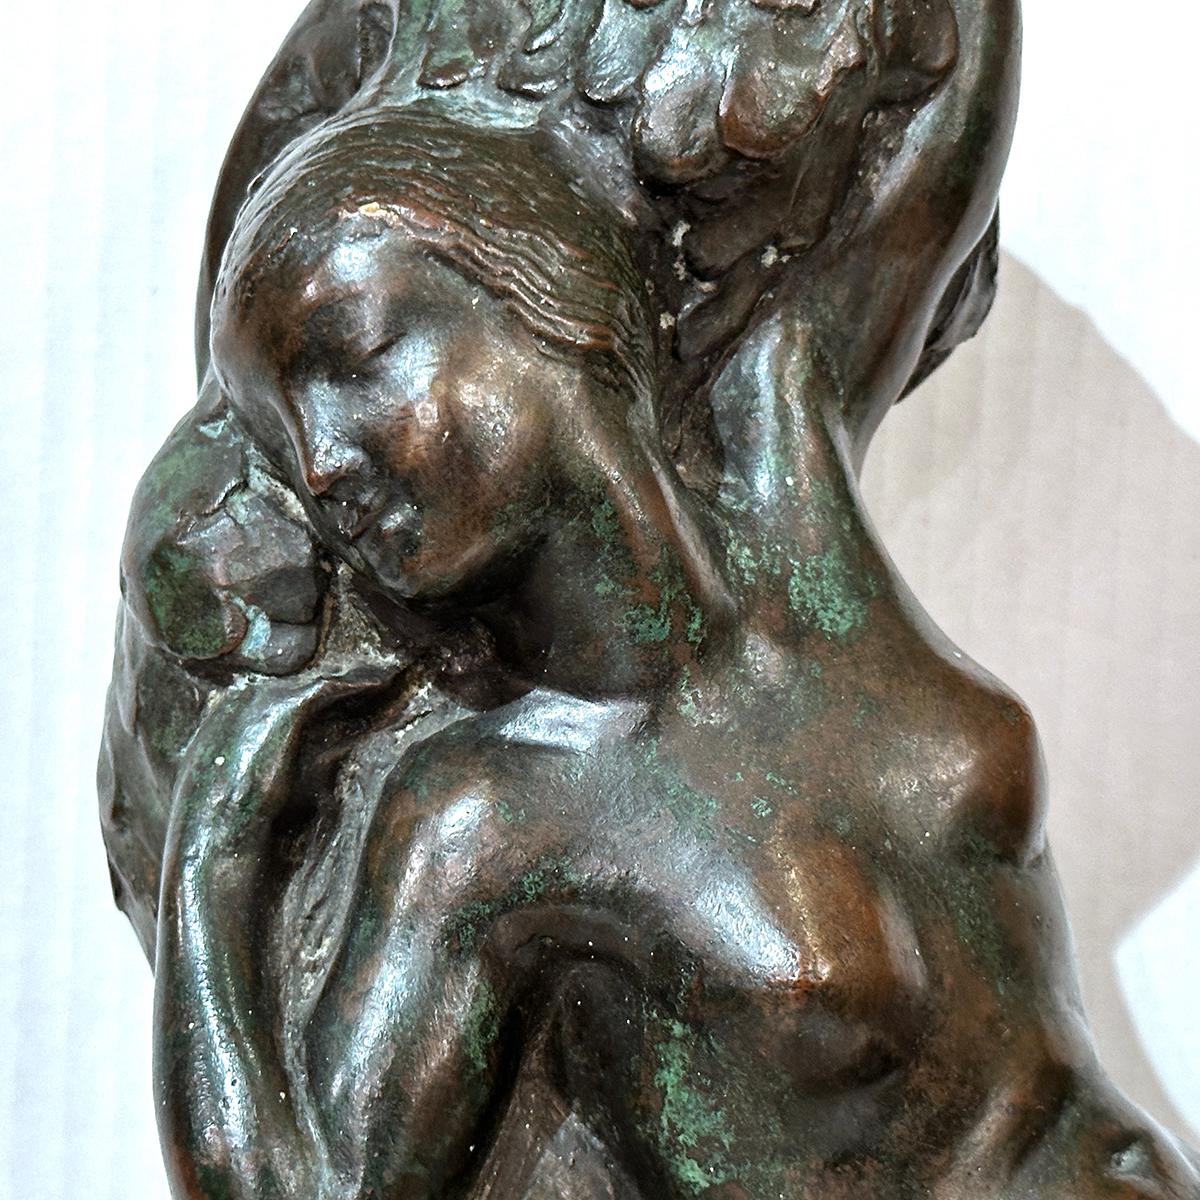 Circa 1940's American patinated bronze statue of a woman with original patina.

Measurements:
Length: 11